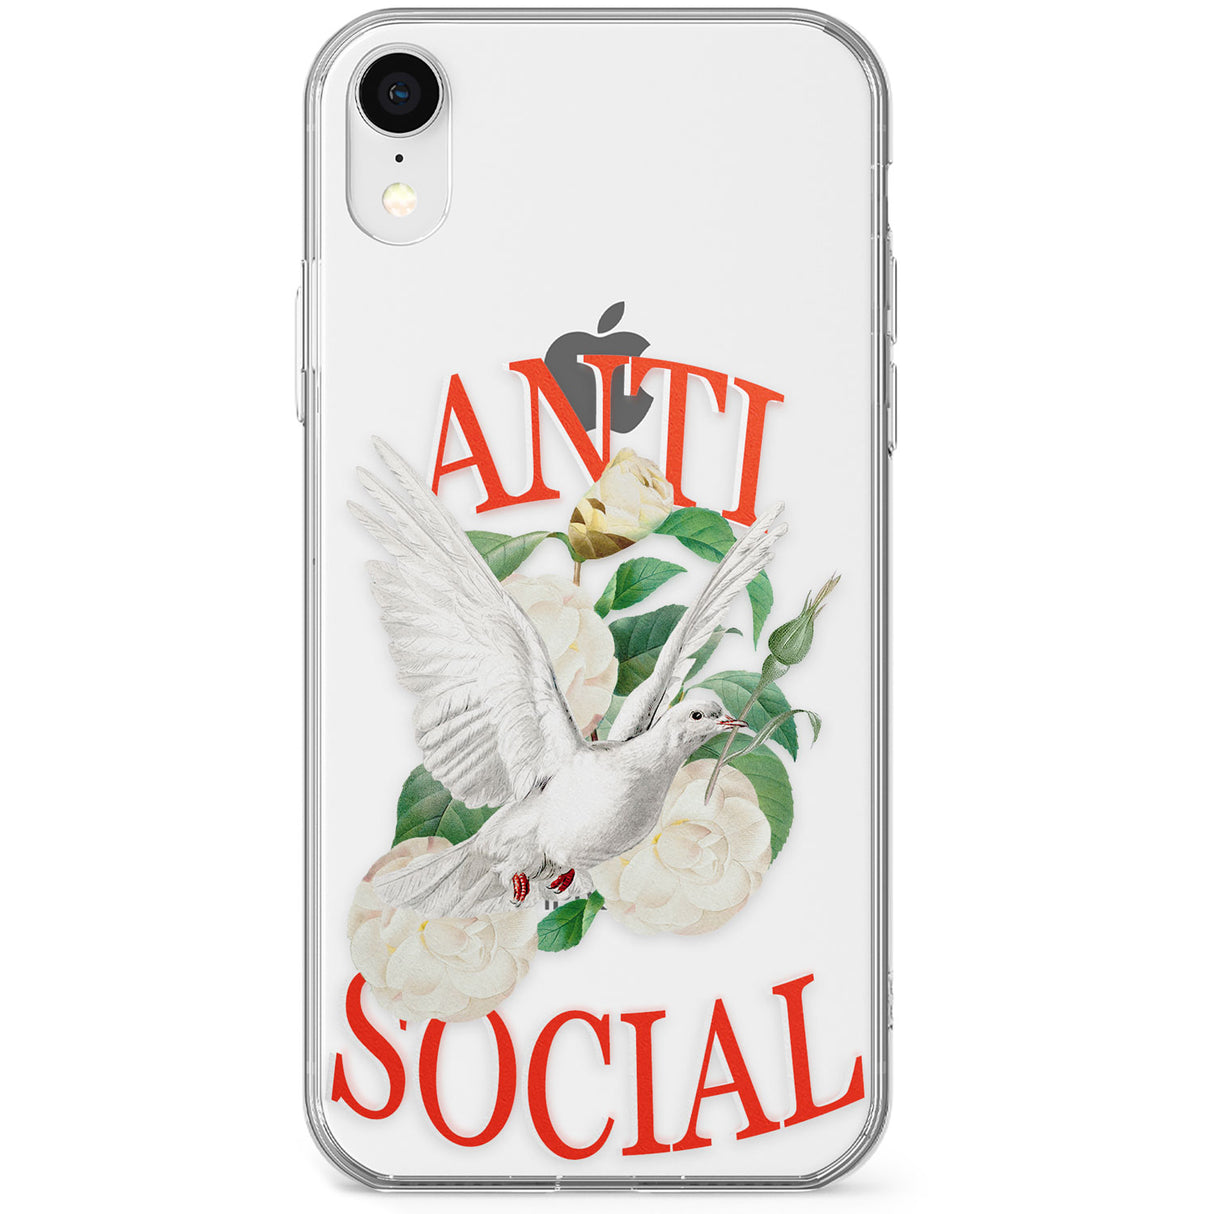 Anti-Social Phone Case for iPhone X, XS Max, XR